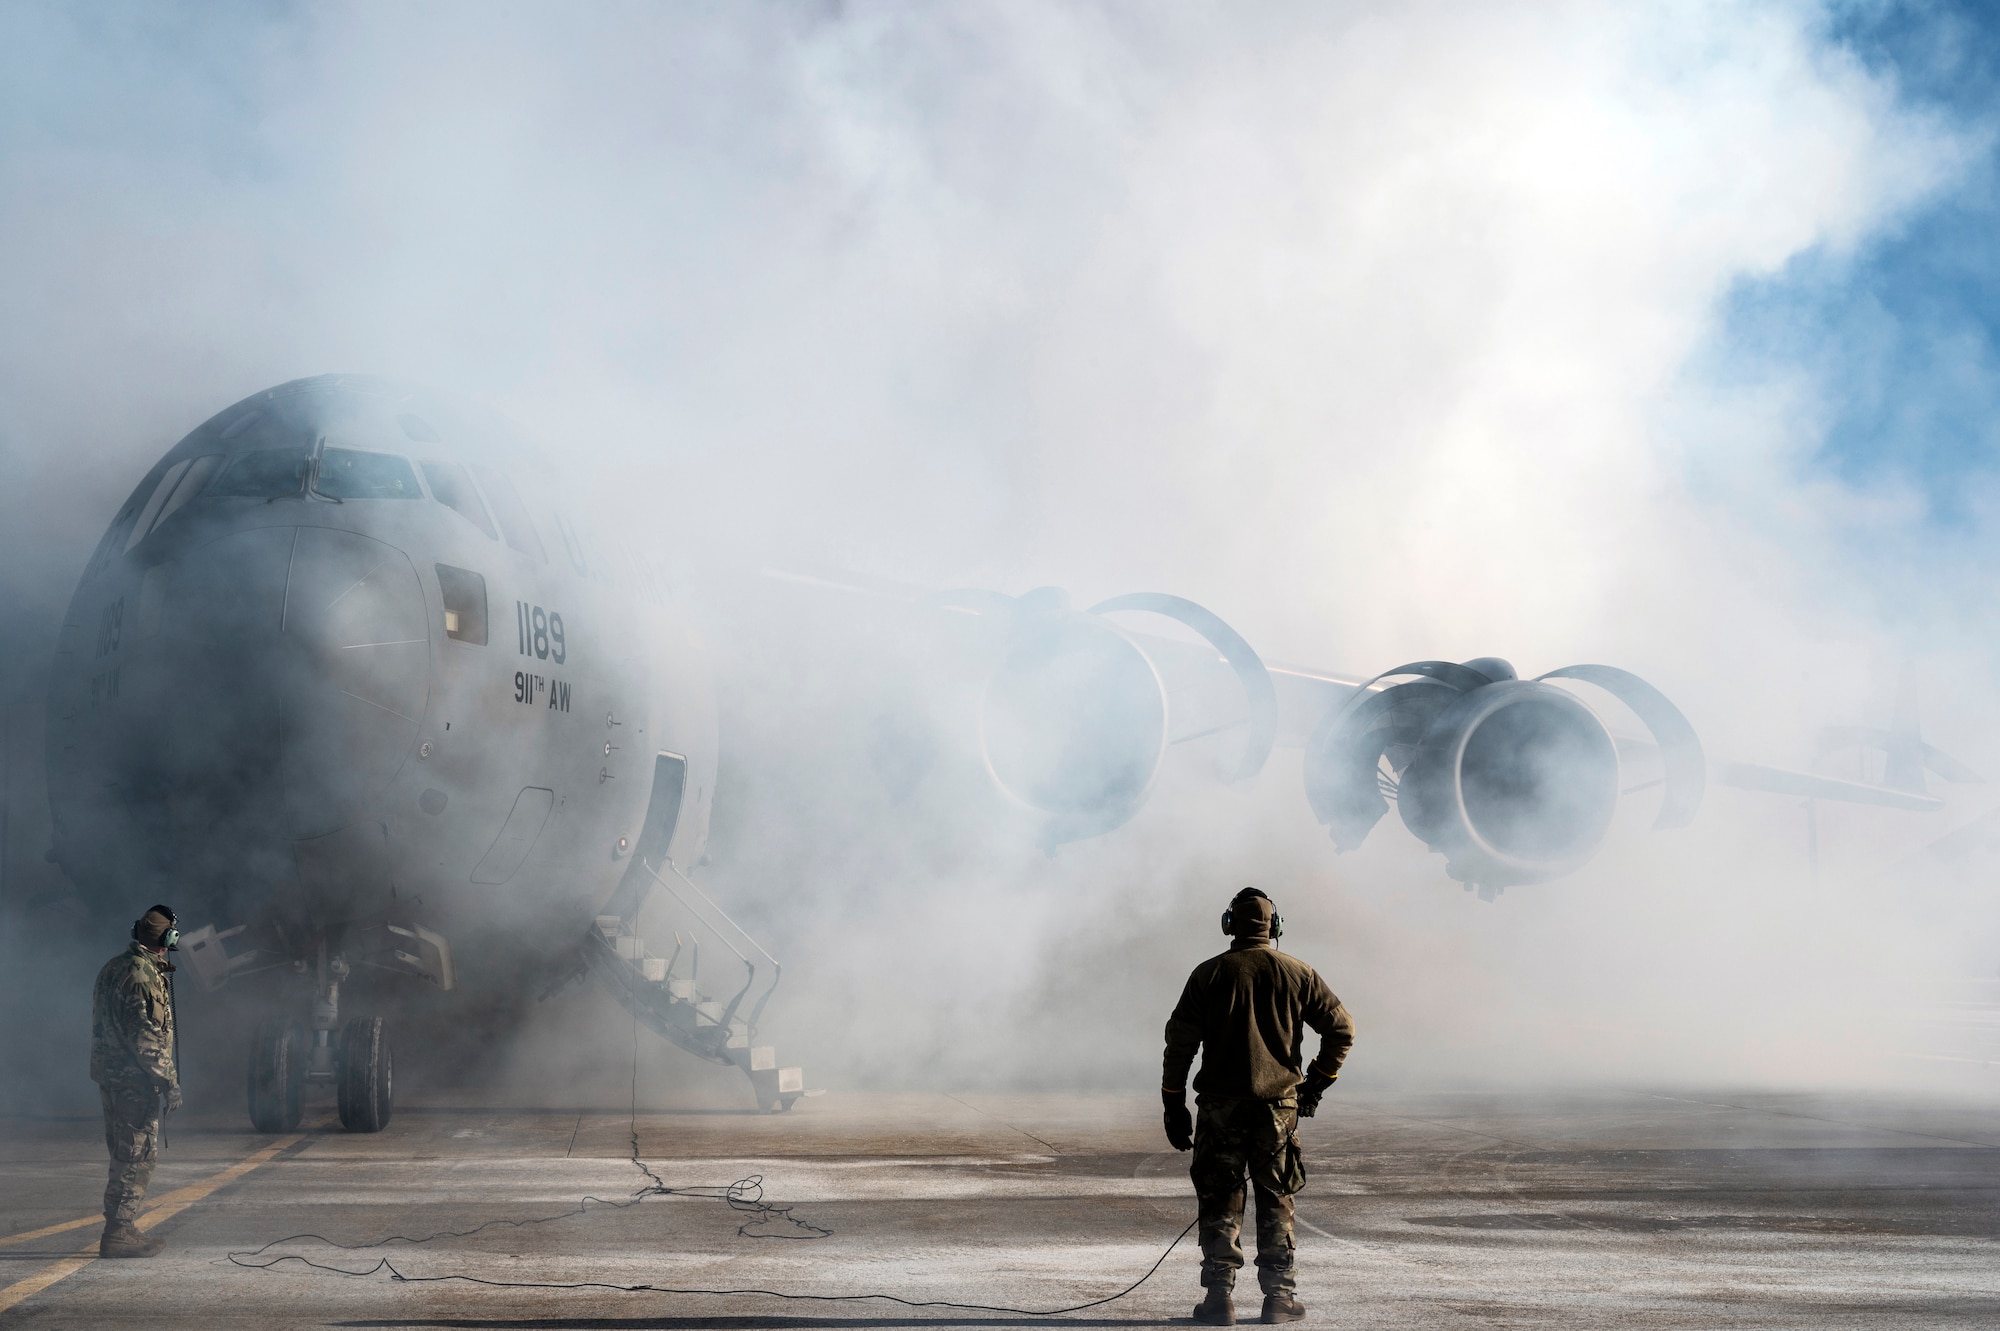 Airmen assigned to the 911th Maintenance Group conduct an engine depreservation run on a C-17 Globemaster III